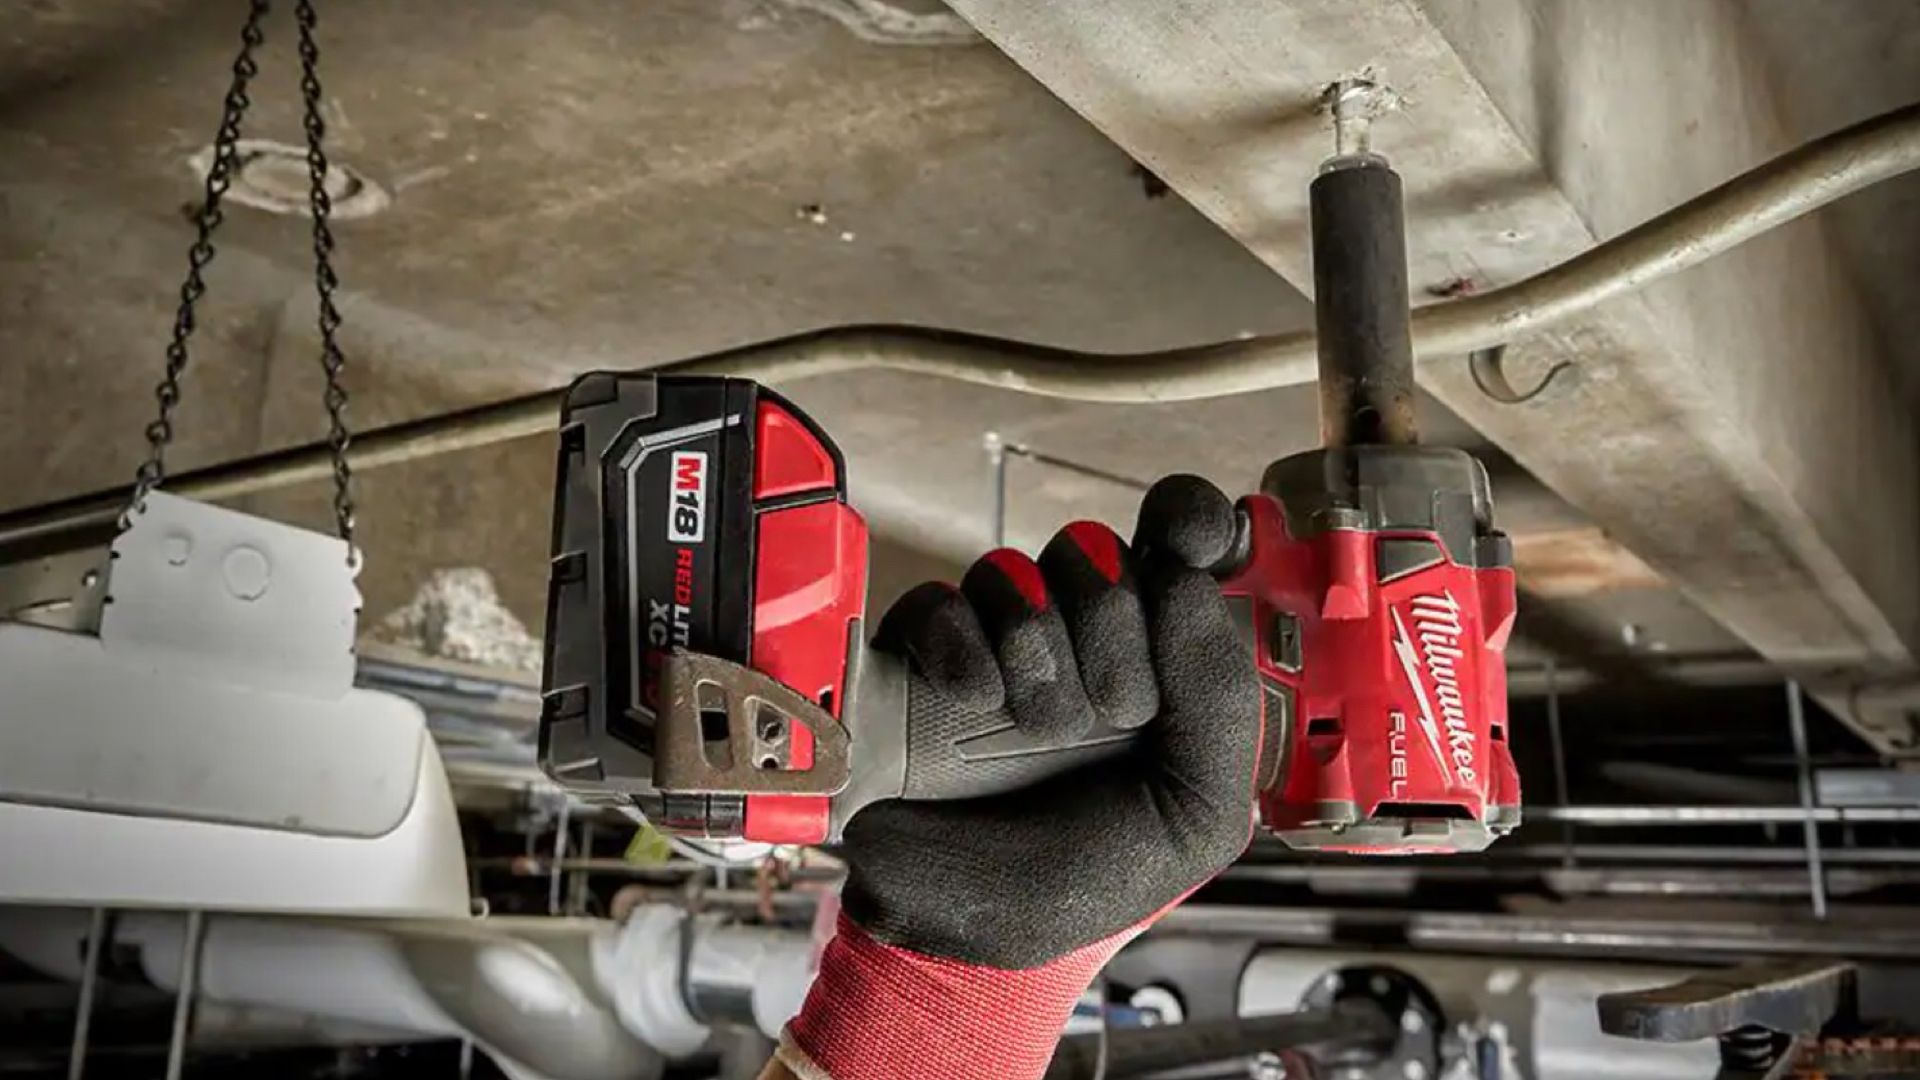 Milwaukee impact wrench being used by a man.